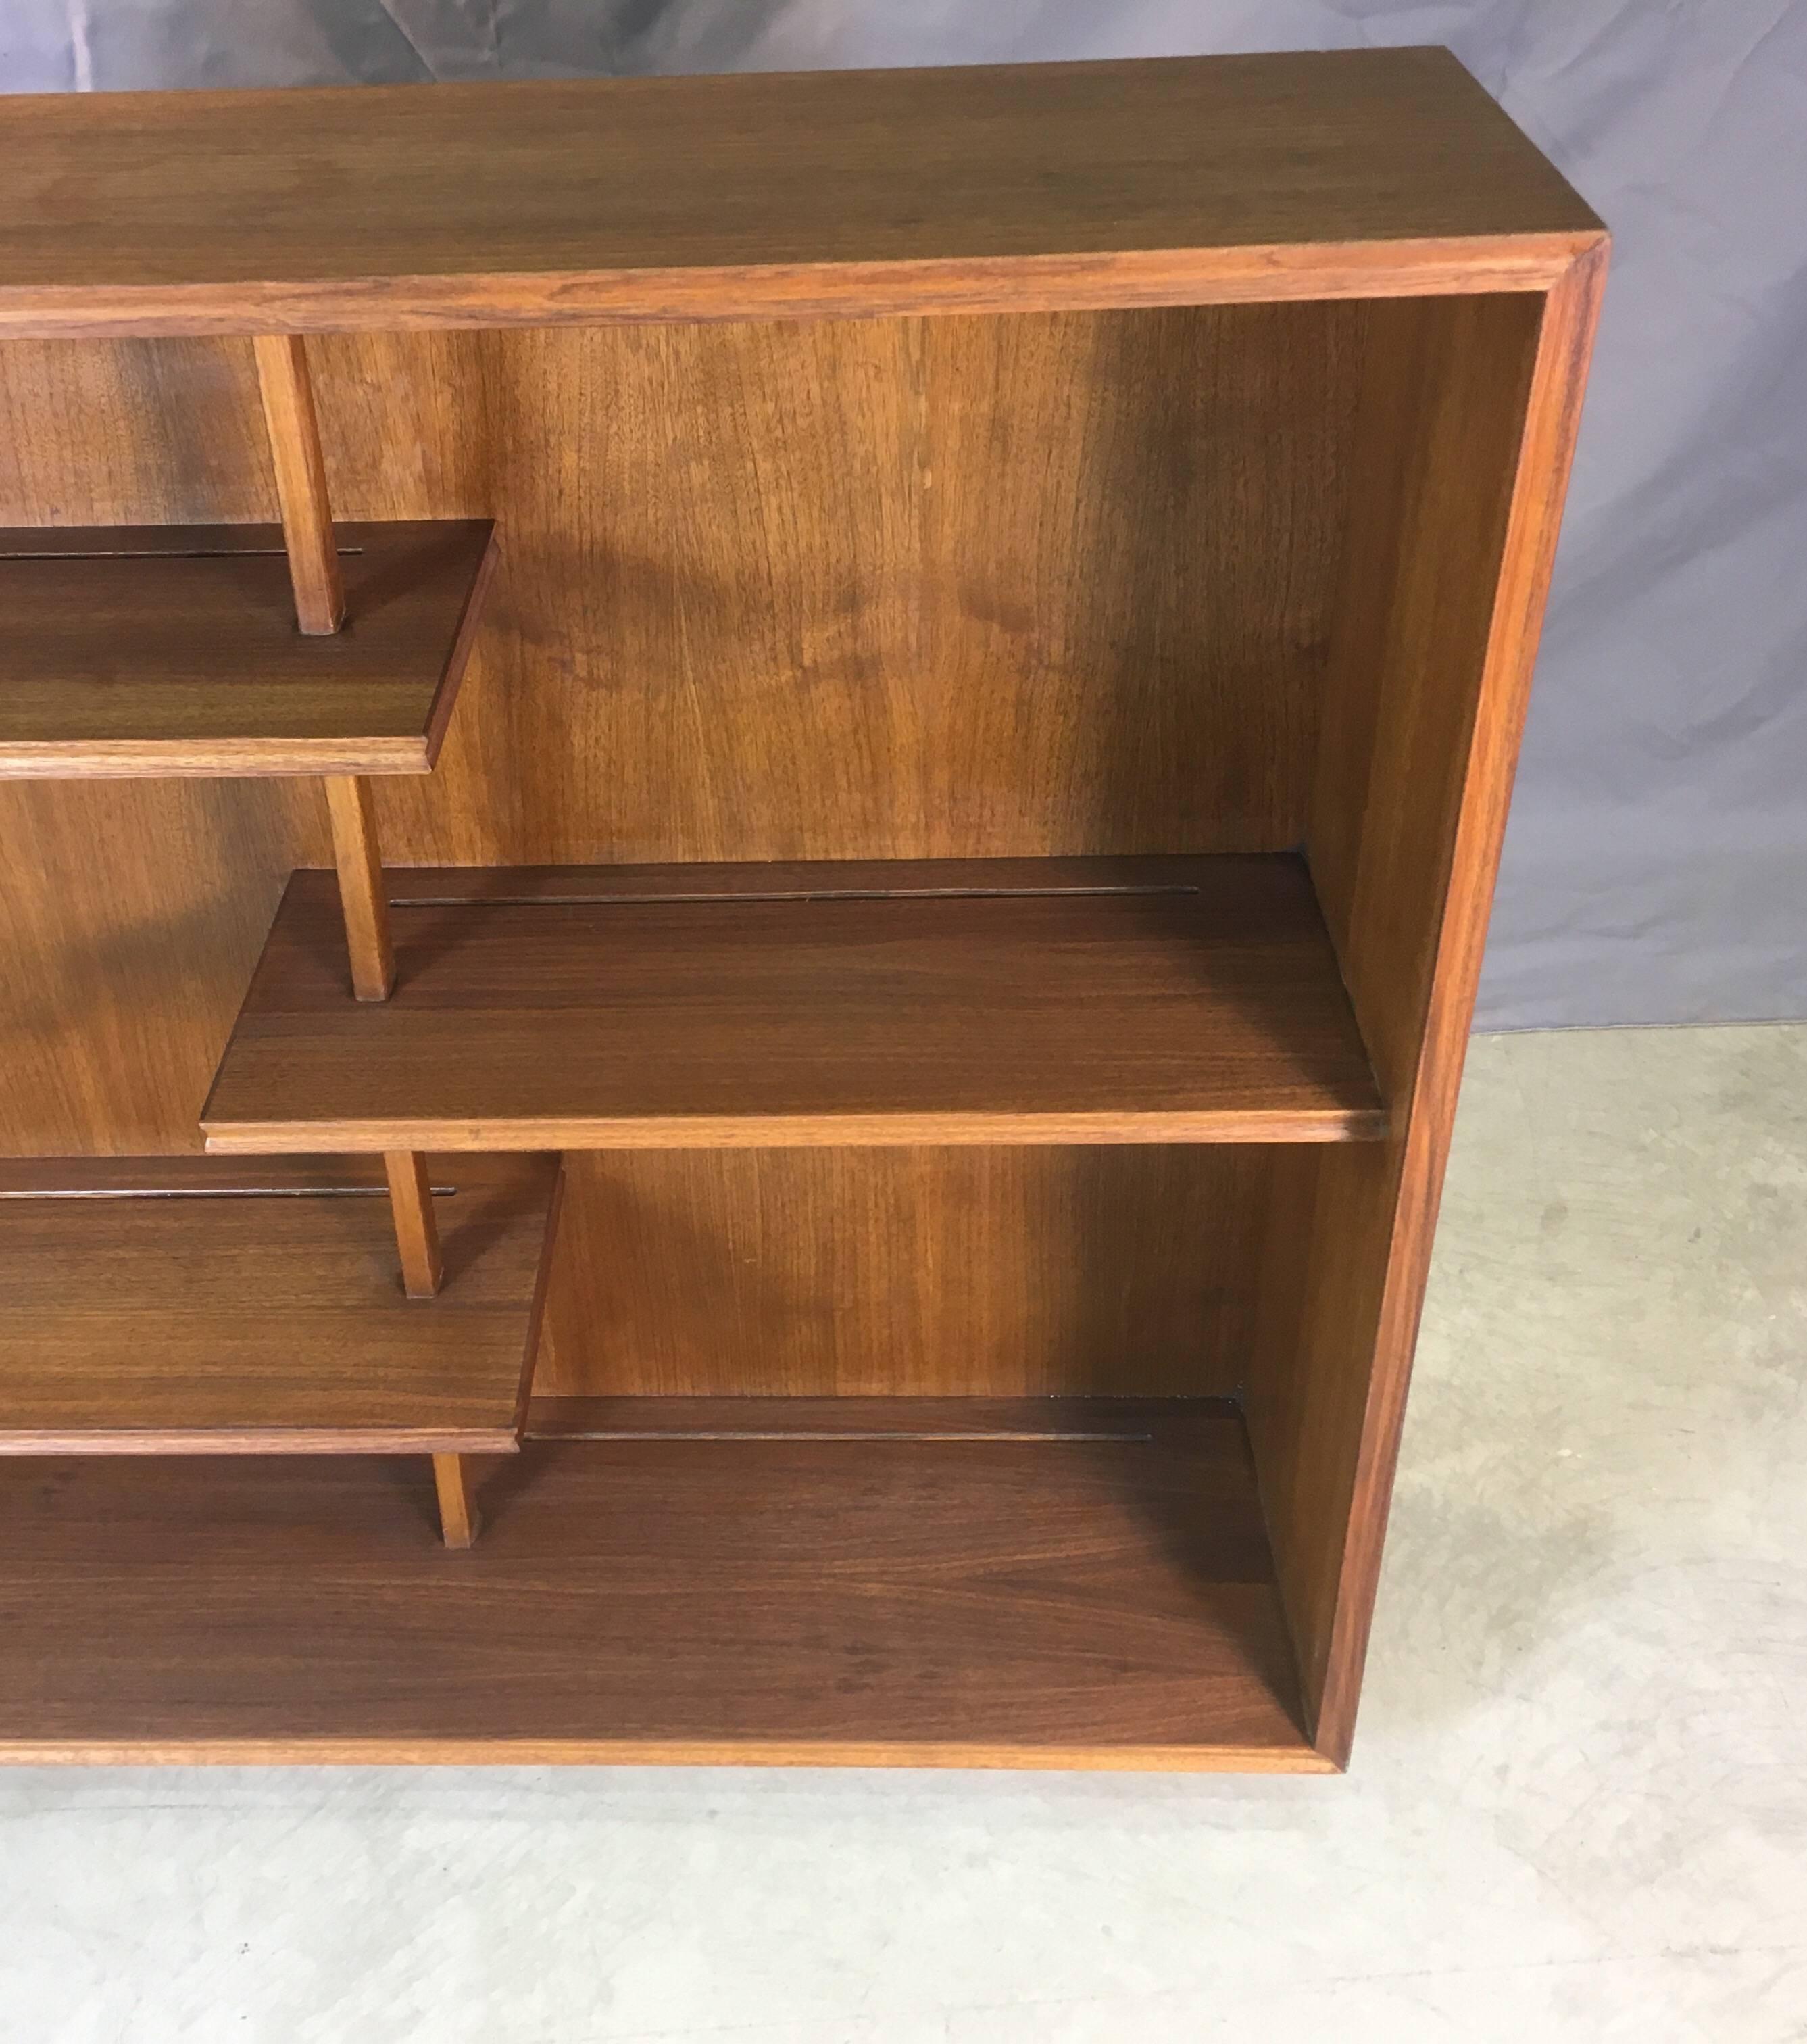 American Mid-20th Century Walnut Wood Display Shelving Unit For Sale